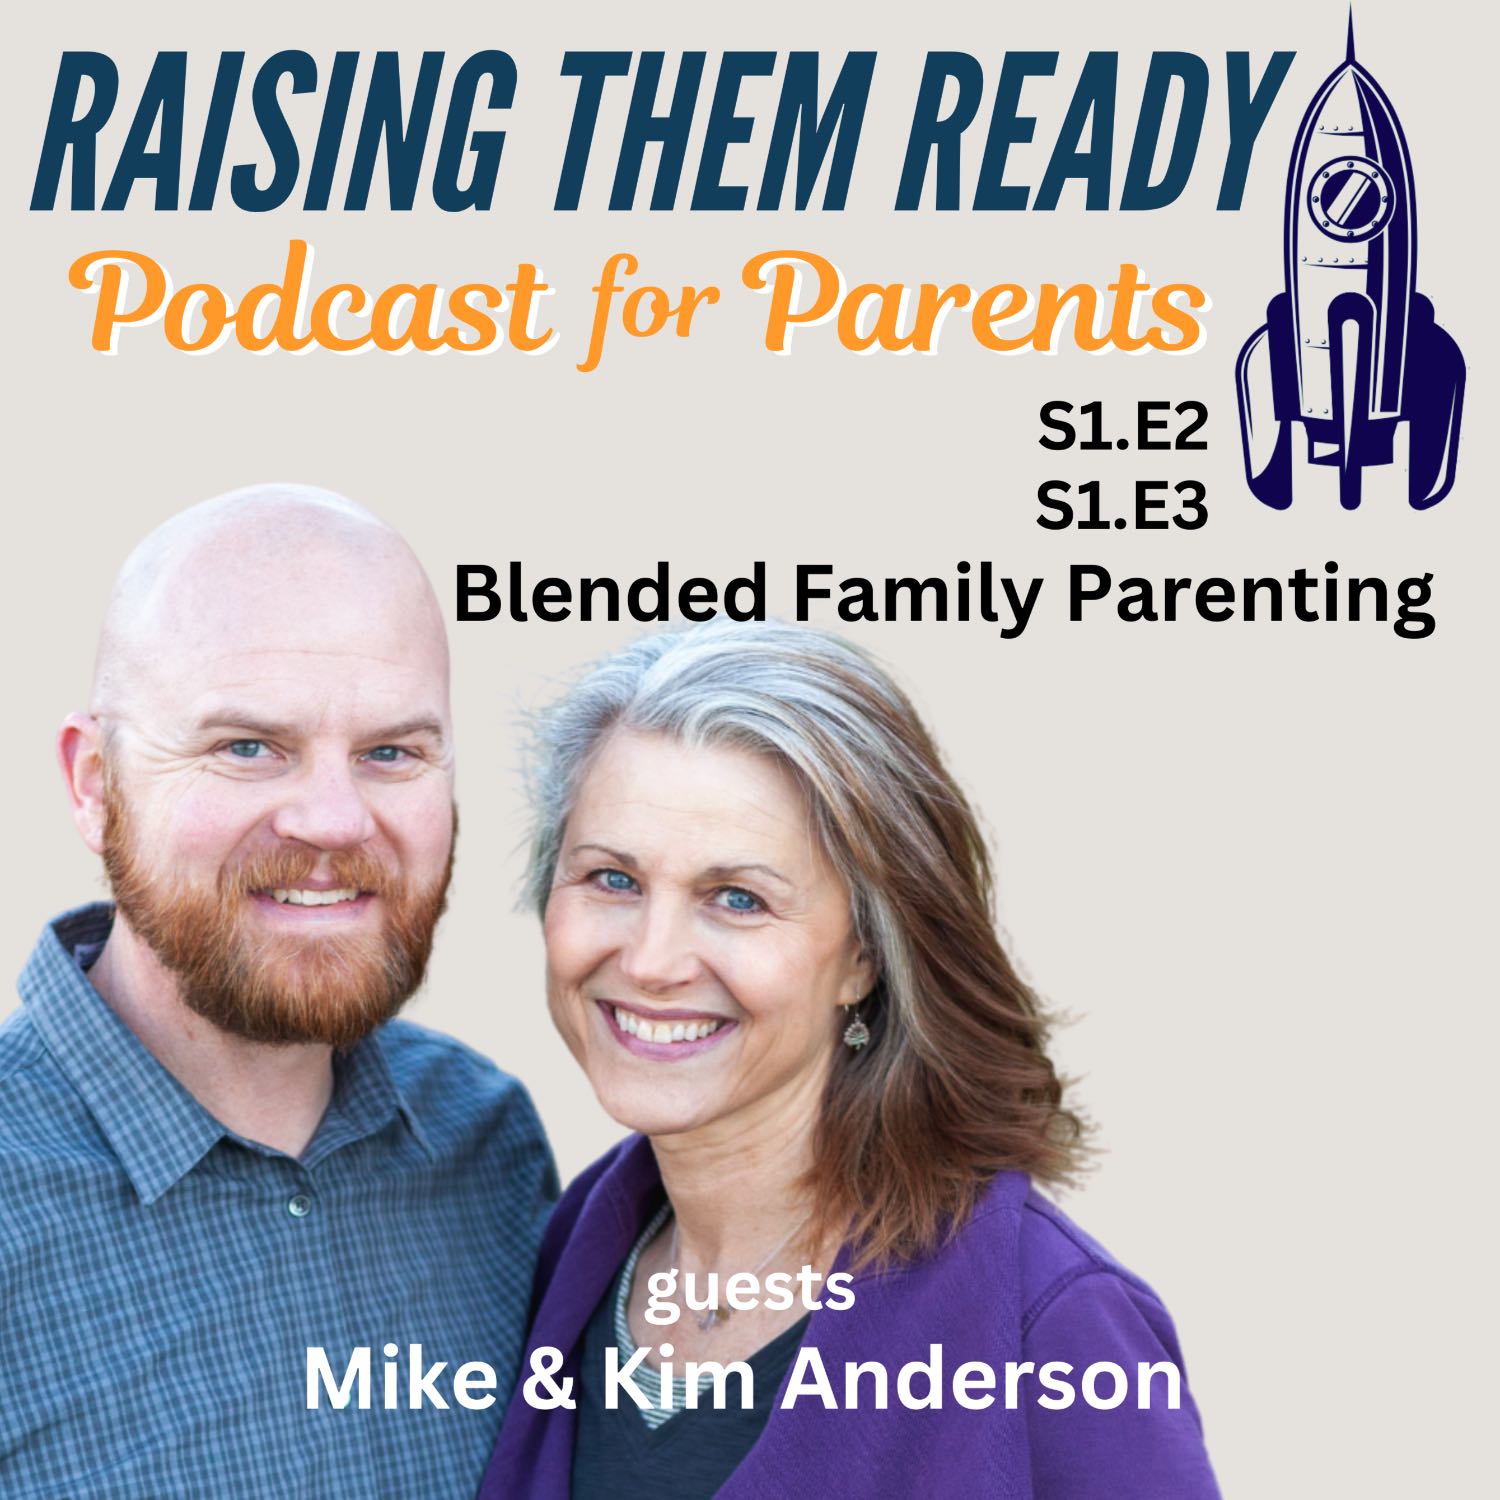 Blended Family - Part 2, with guest Mike & Kim Anderson